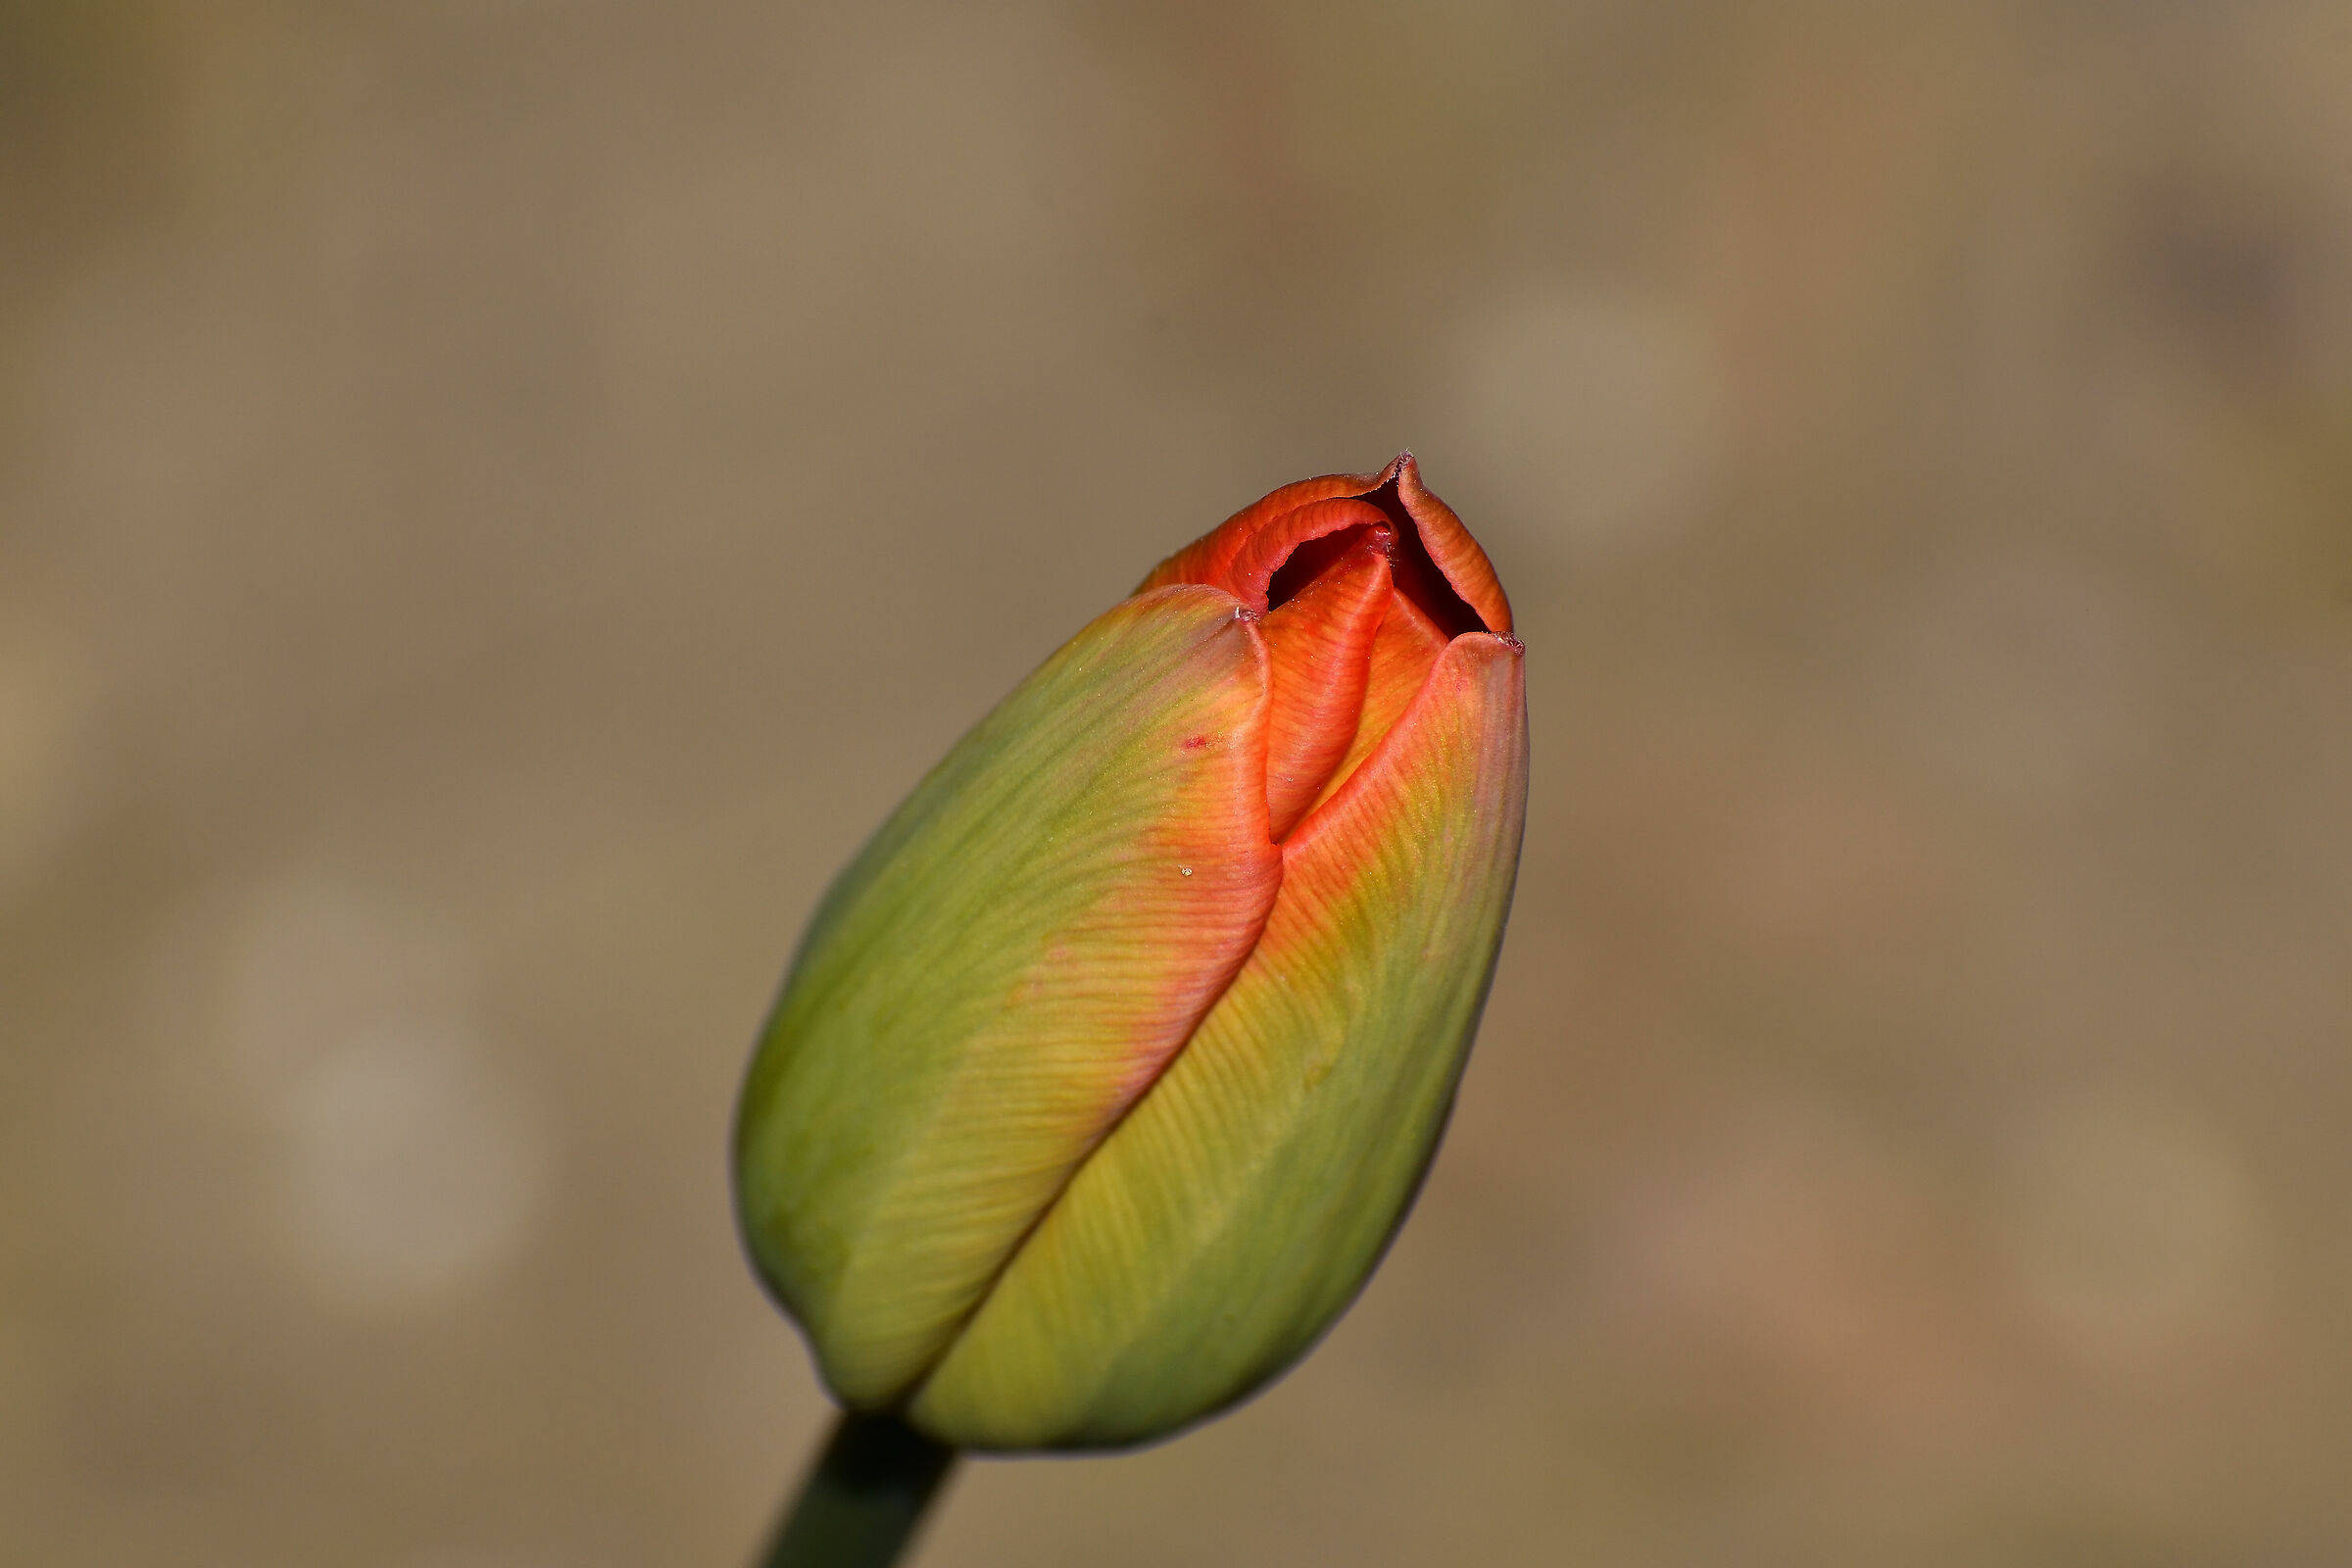 The first Tulip of the season...